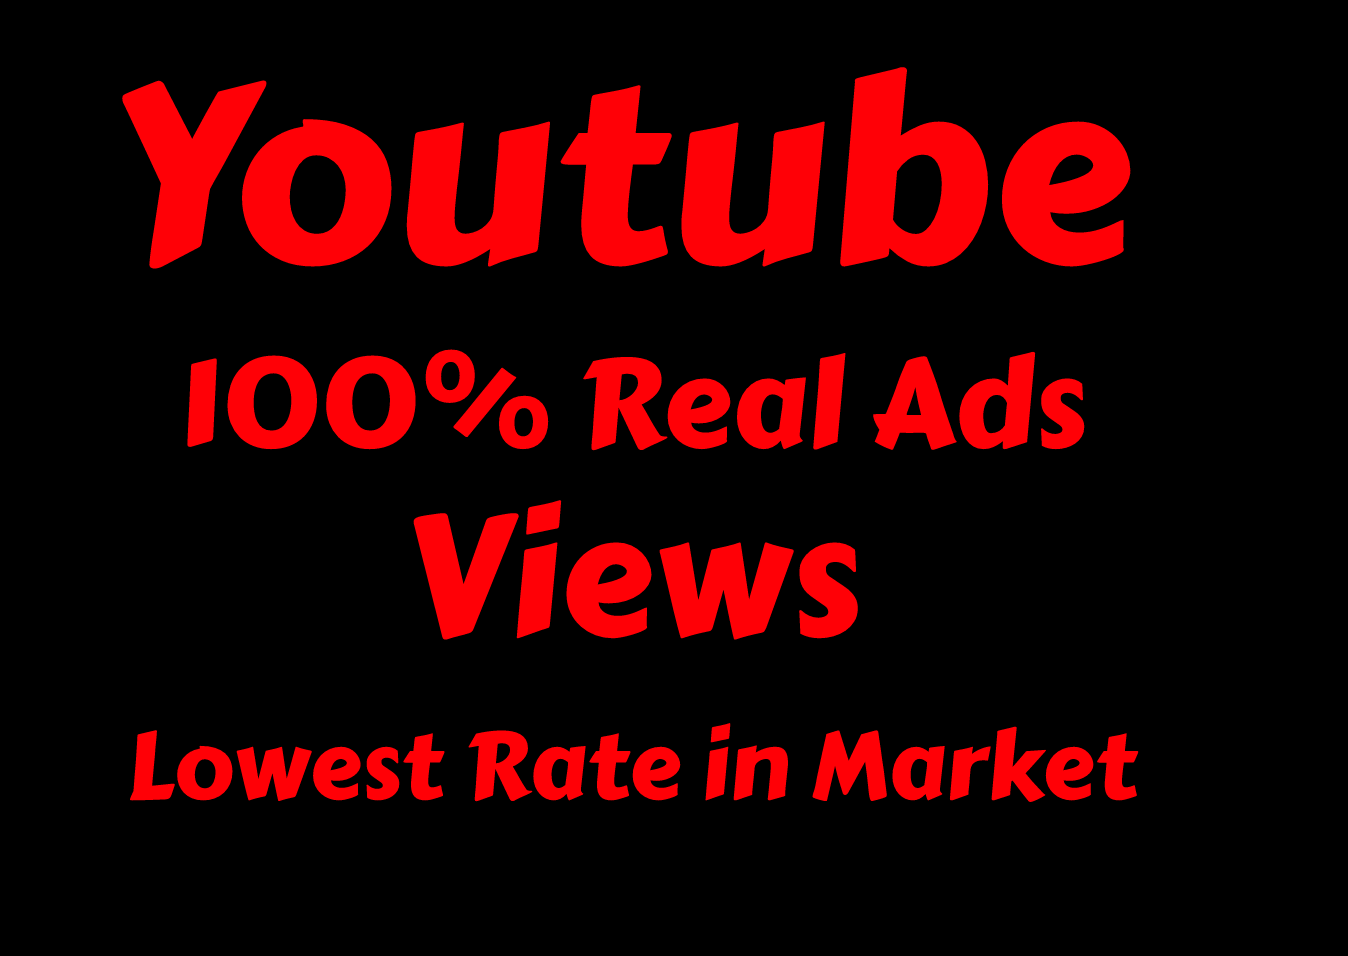  ADWORDS PROMOTION FOR YOUTUBE VIDEO